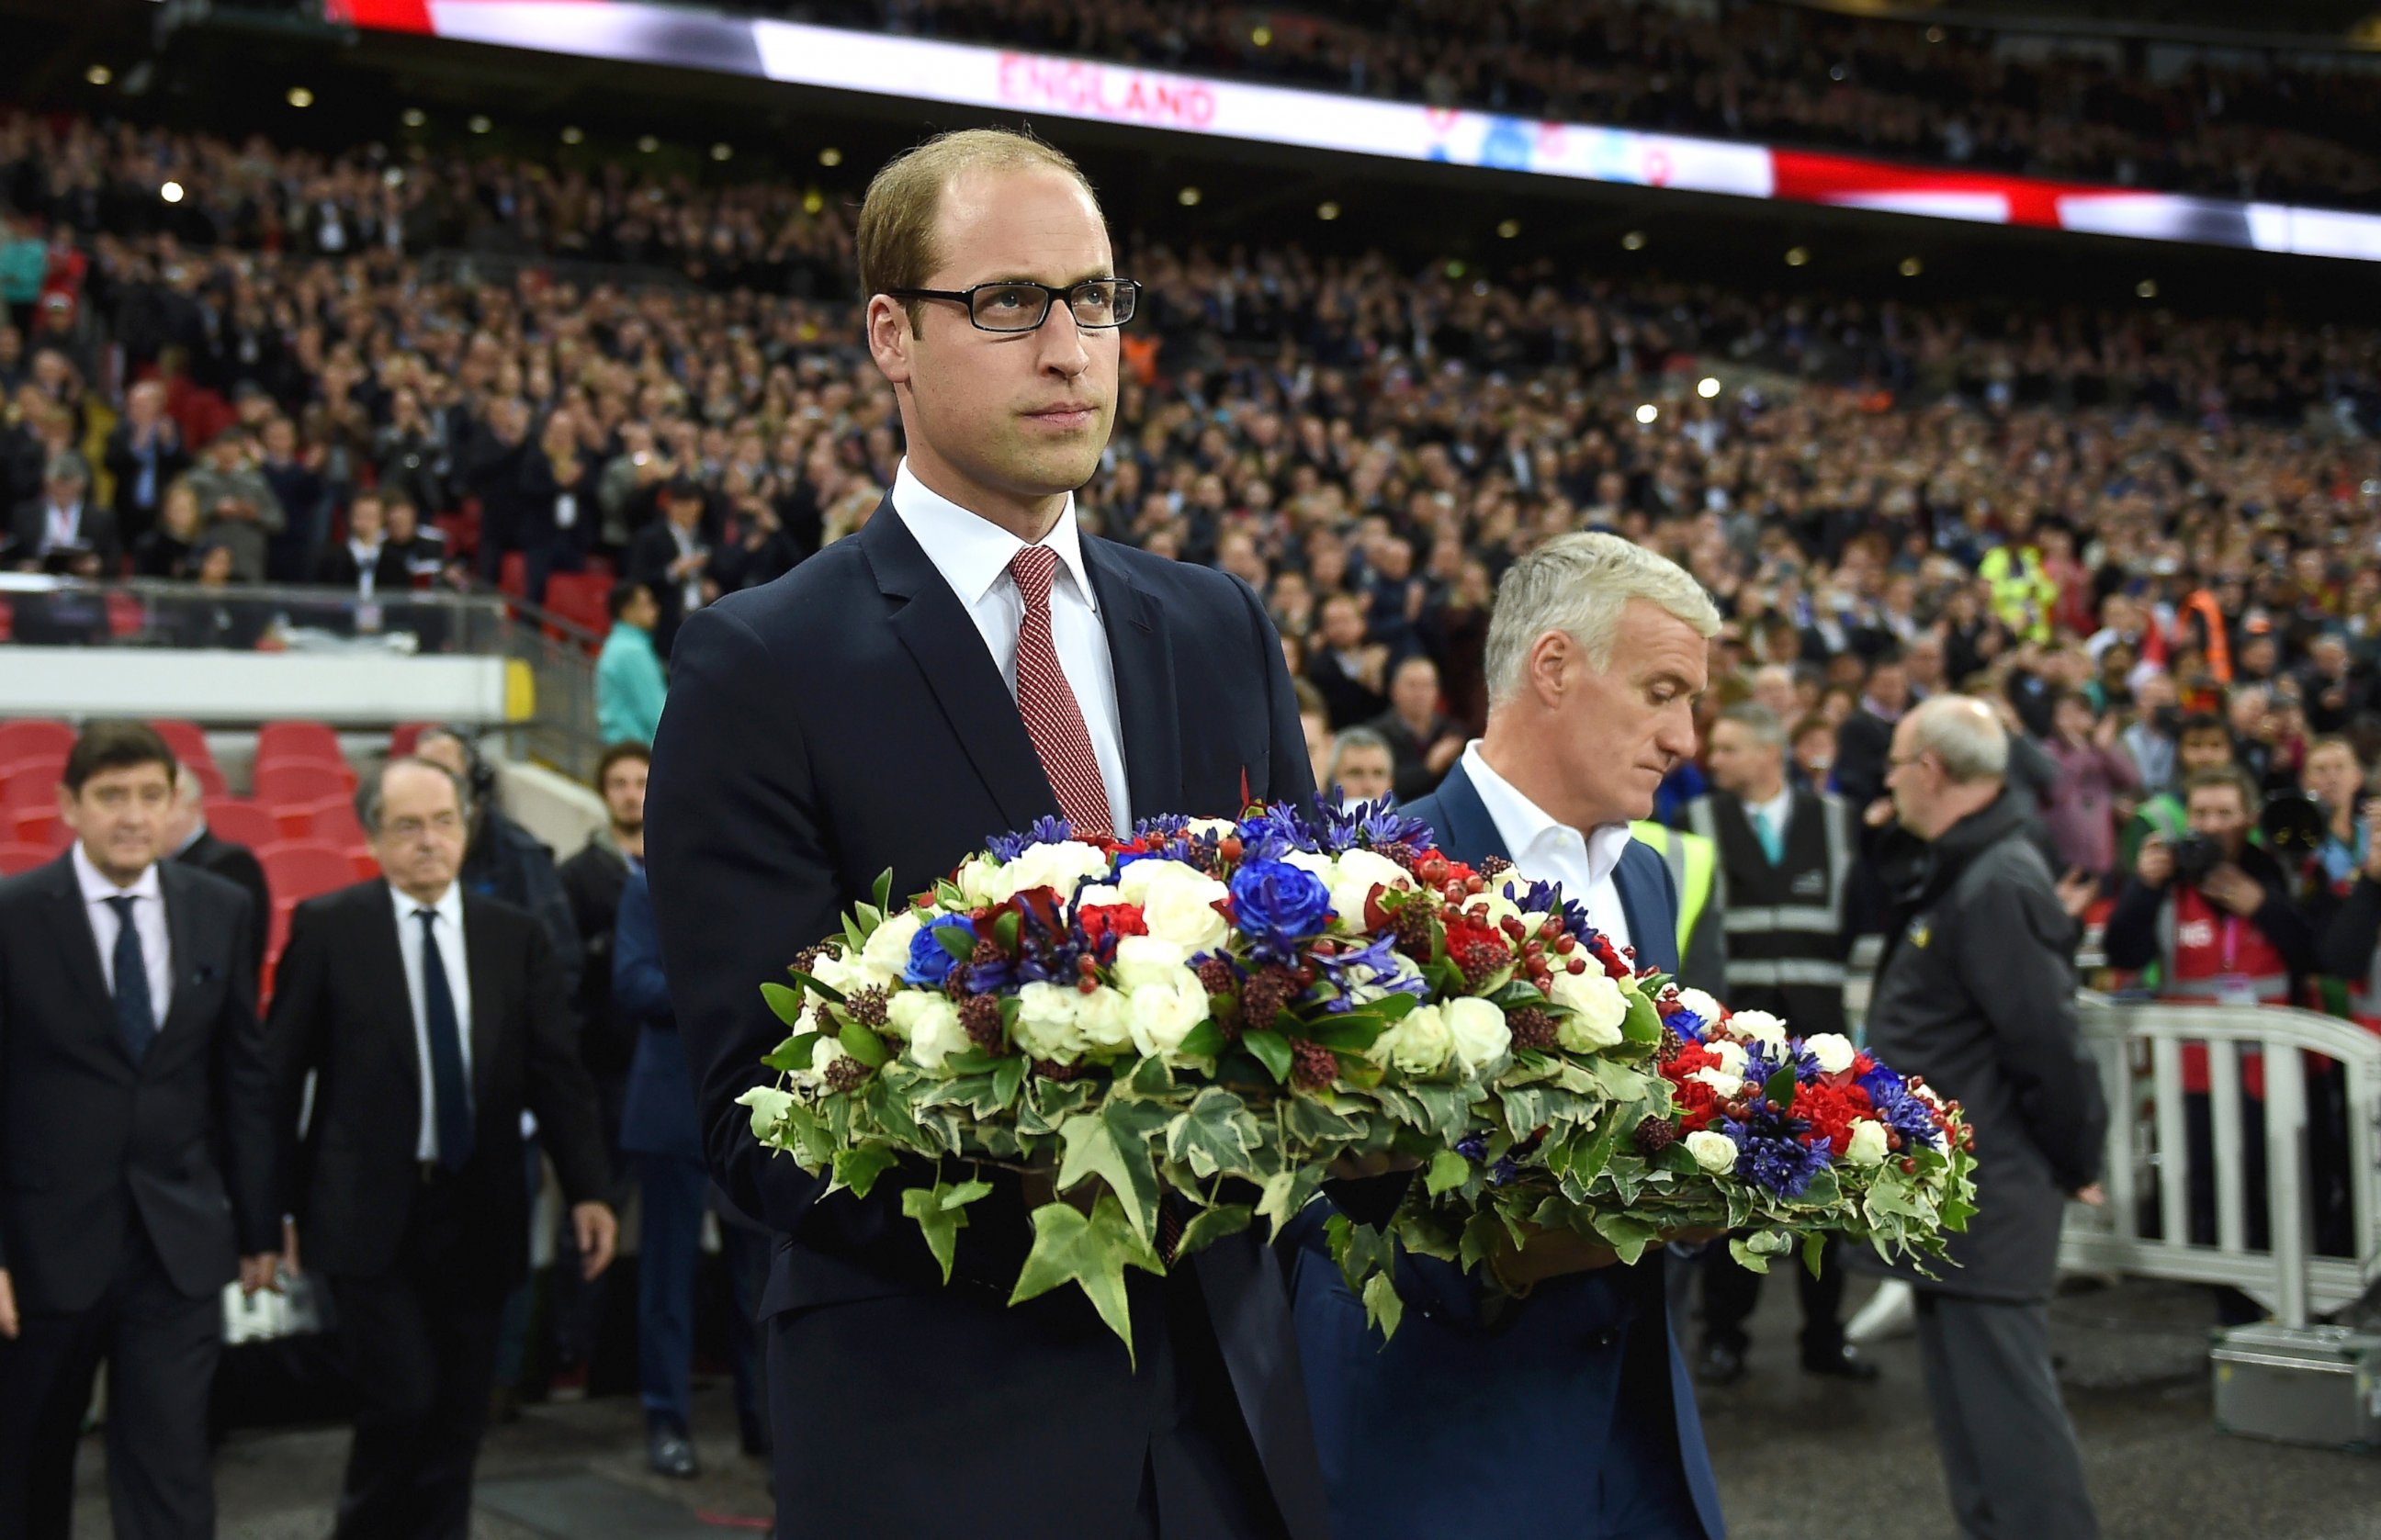 PHOTO: Prince William, The Duke of Cambridge holds the floral tribute during the International Friendly match between England and France at Wembley Stadium, on Nov. 17, 2015, in London.